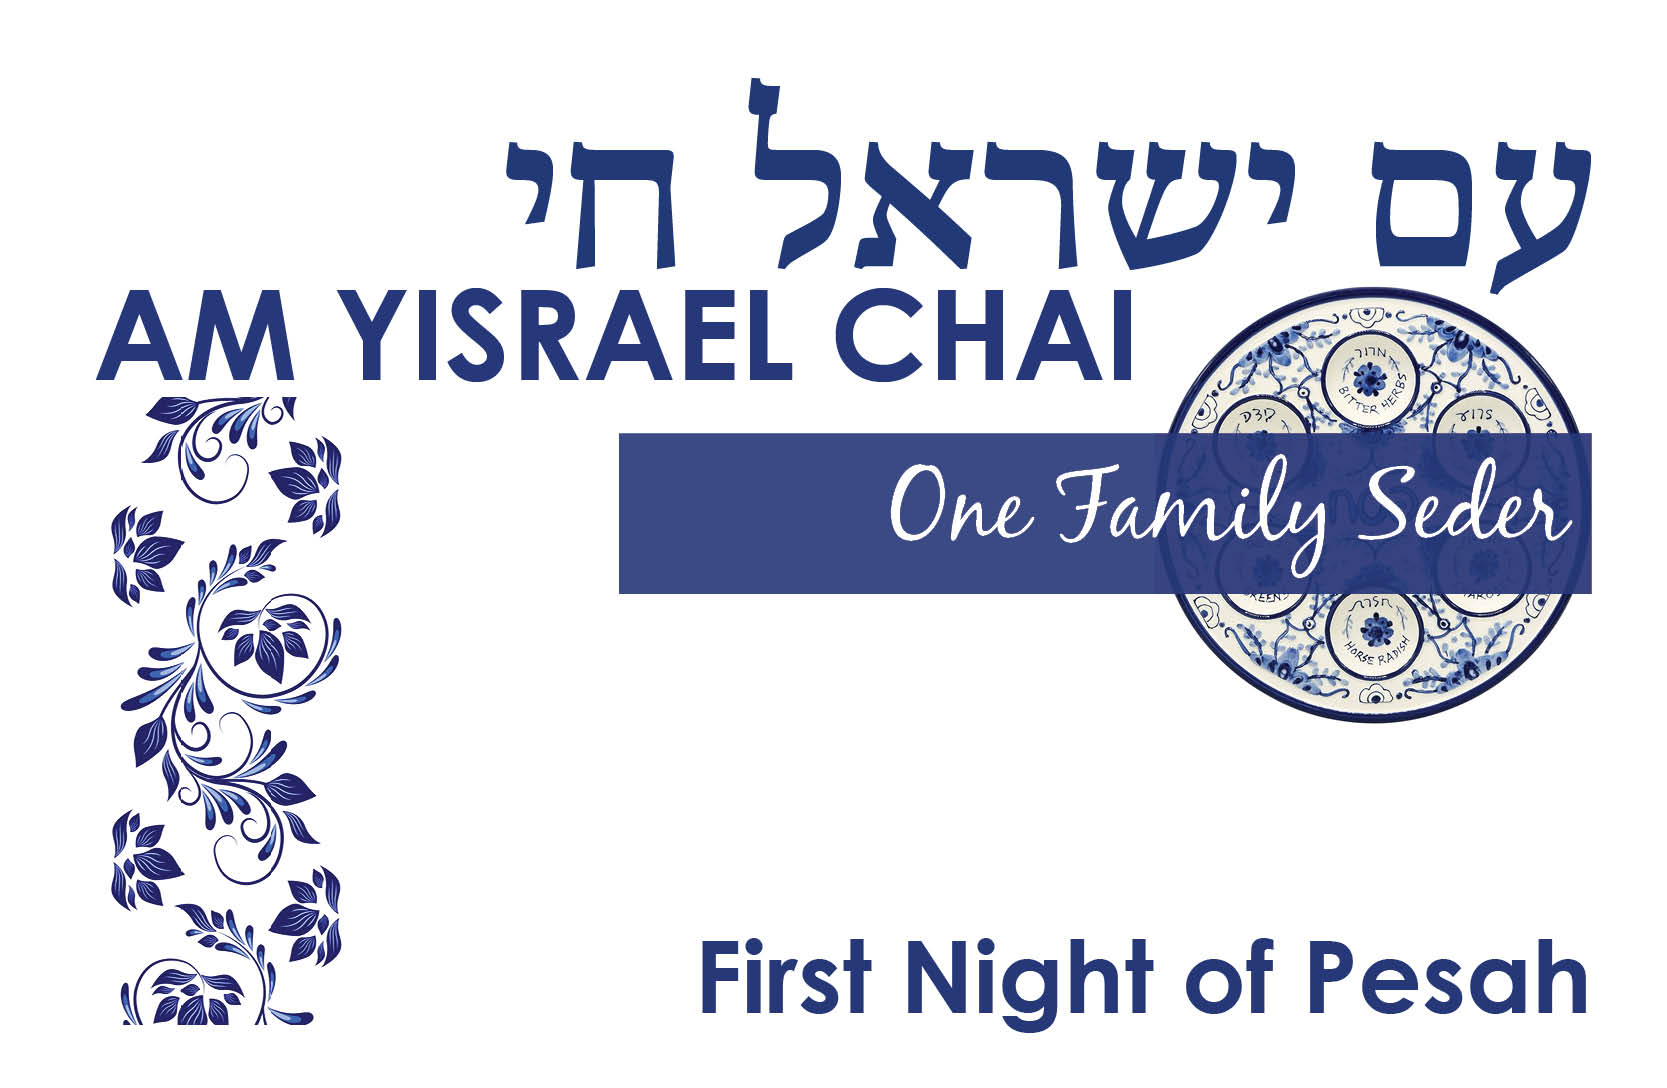 Community Seder First Night of Pesah - Reserve by April 17